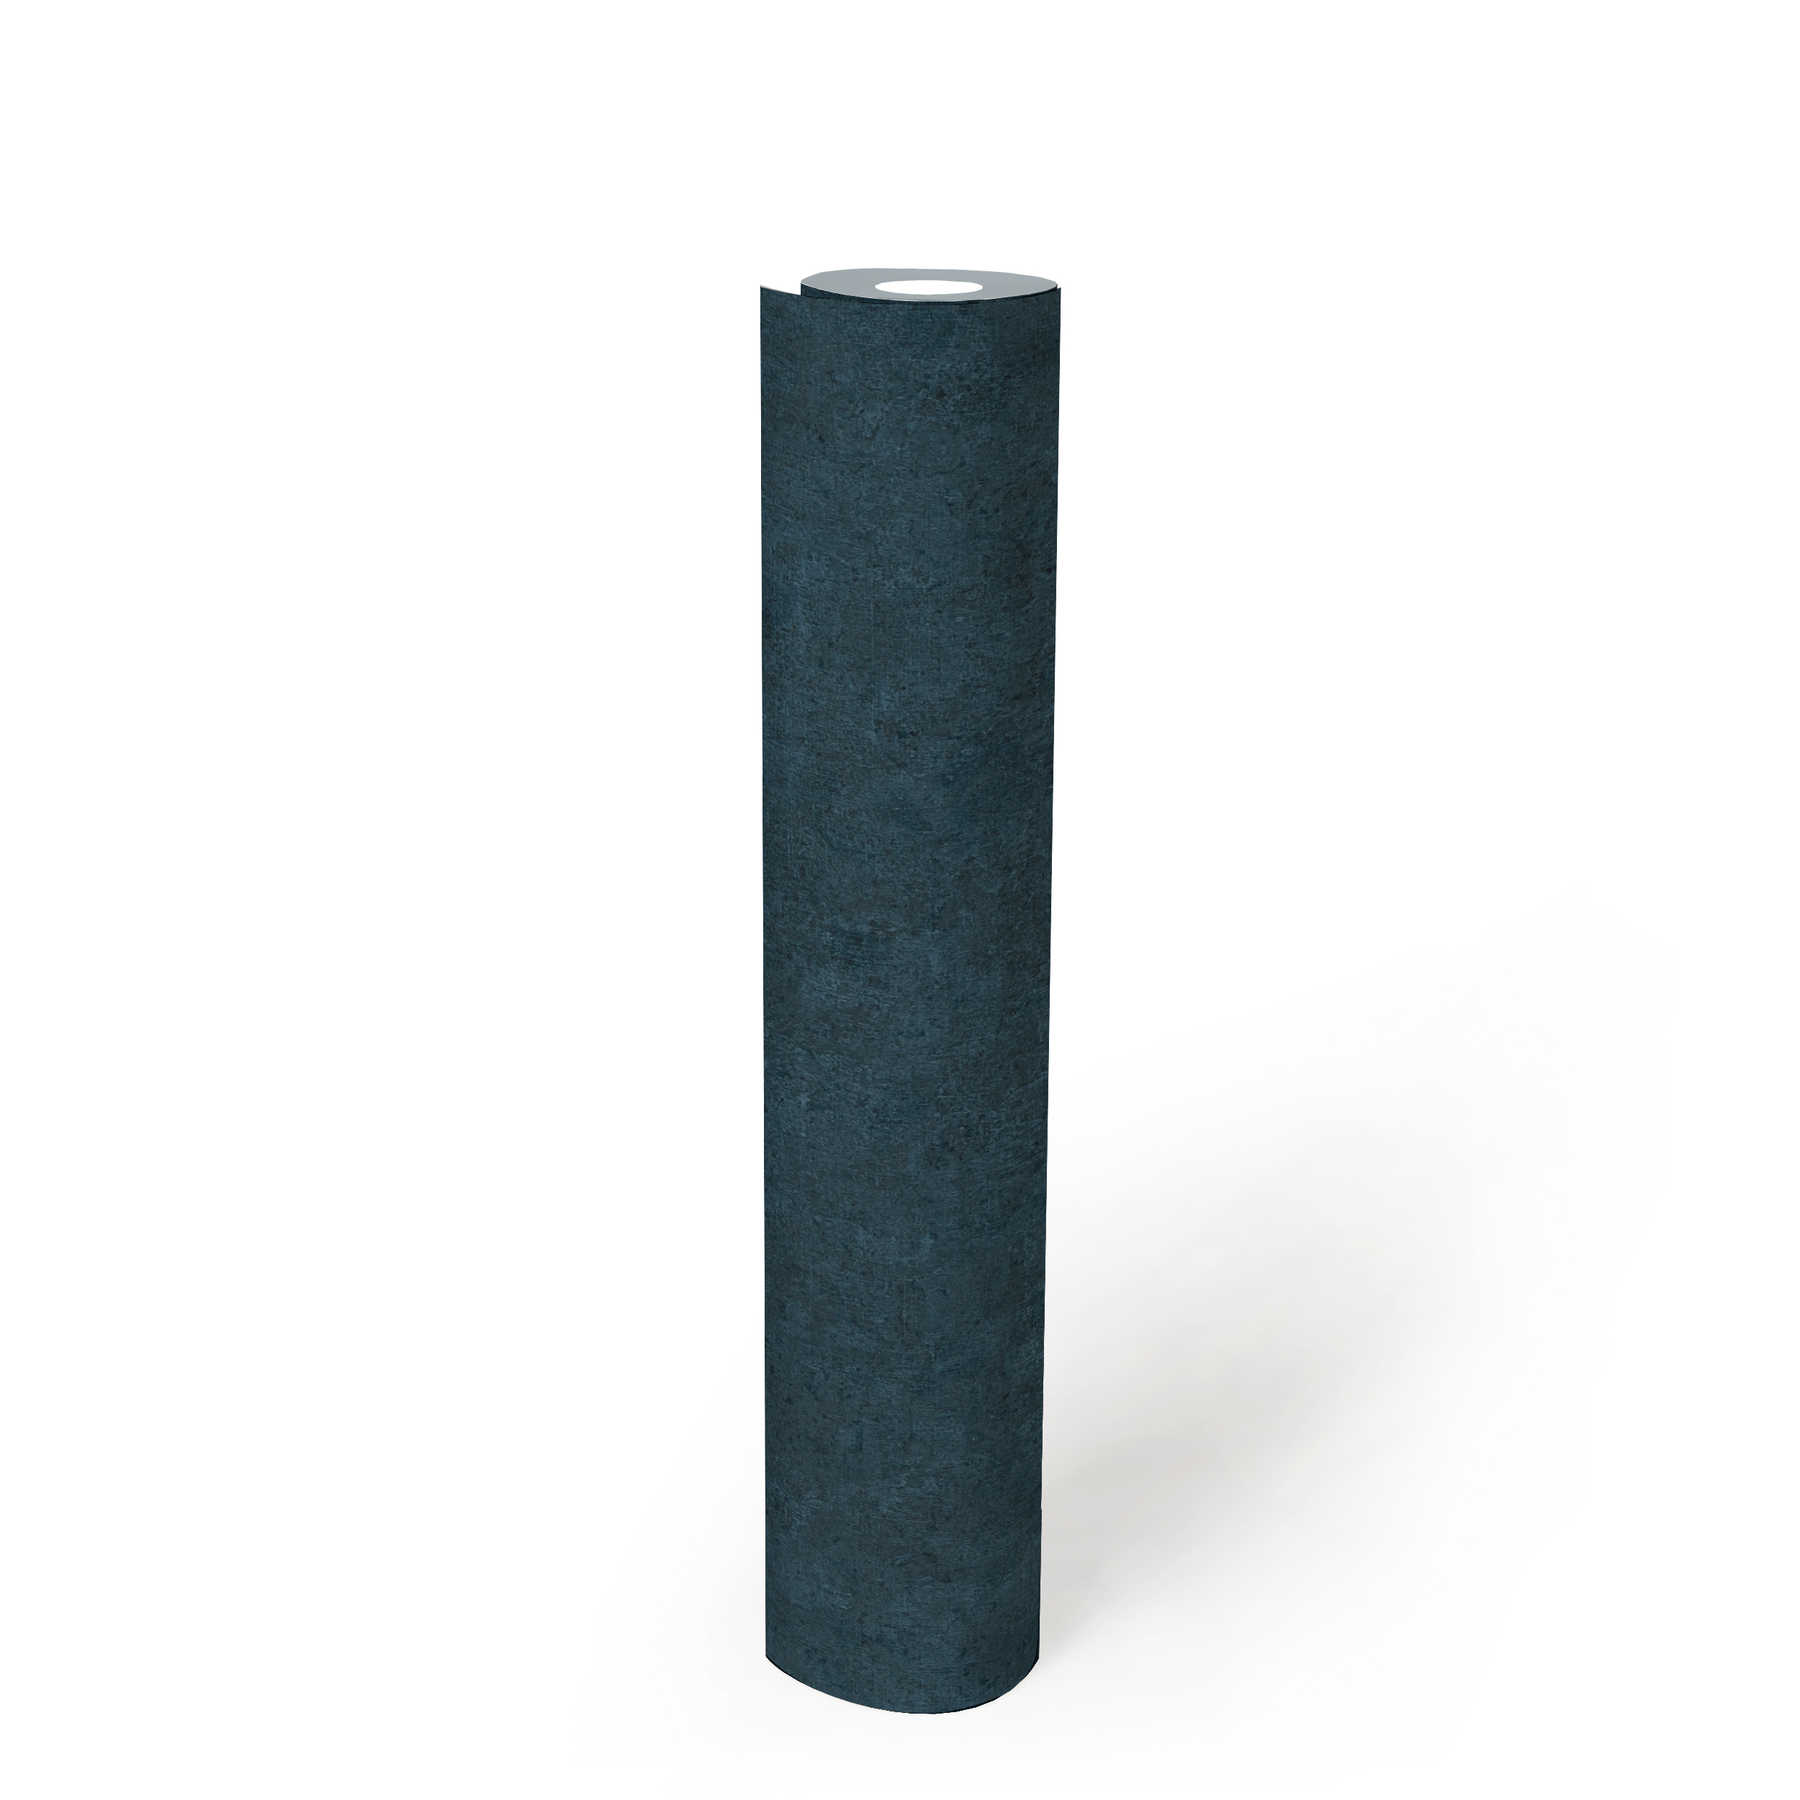             Wallpaper with subtle colour pattern in used look - blue
        